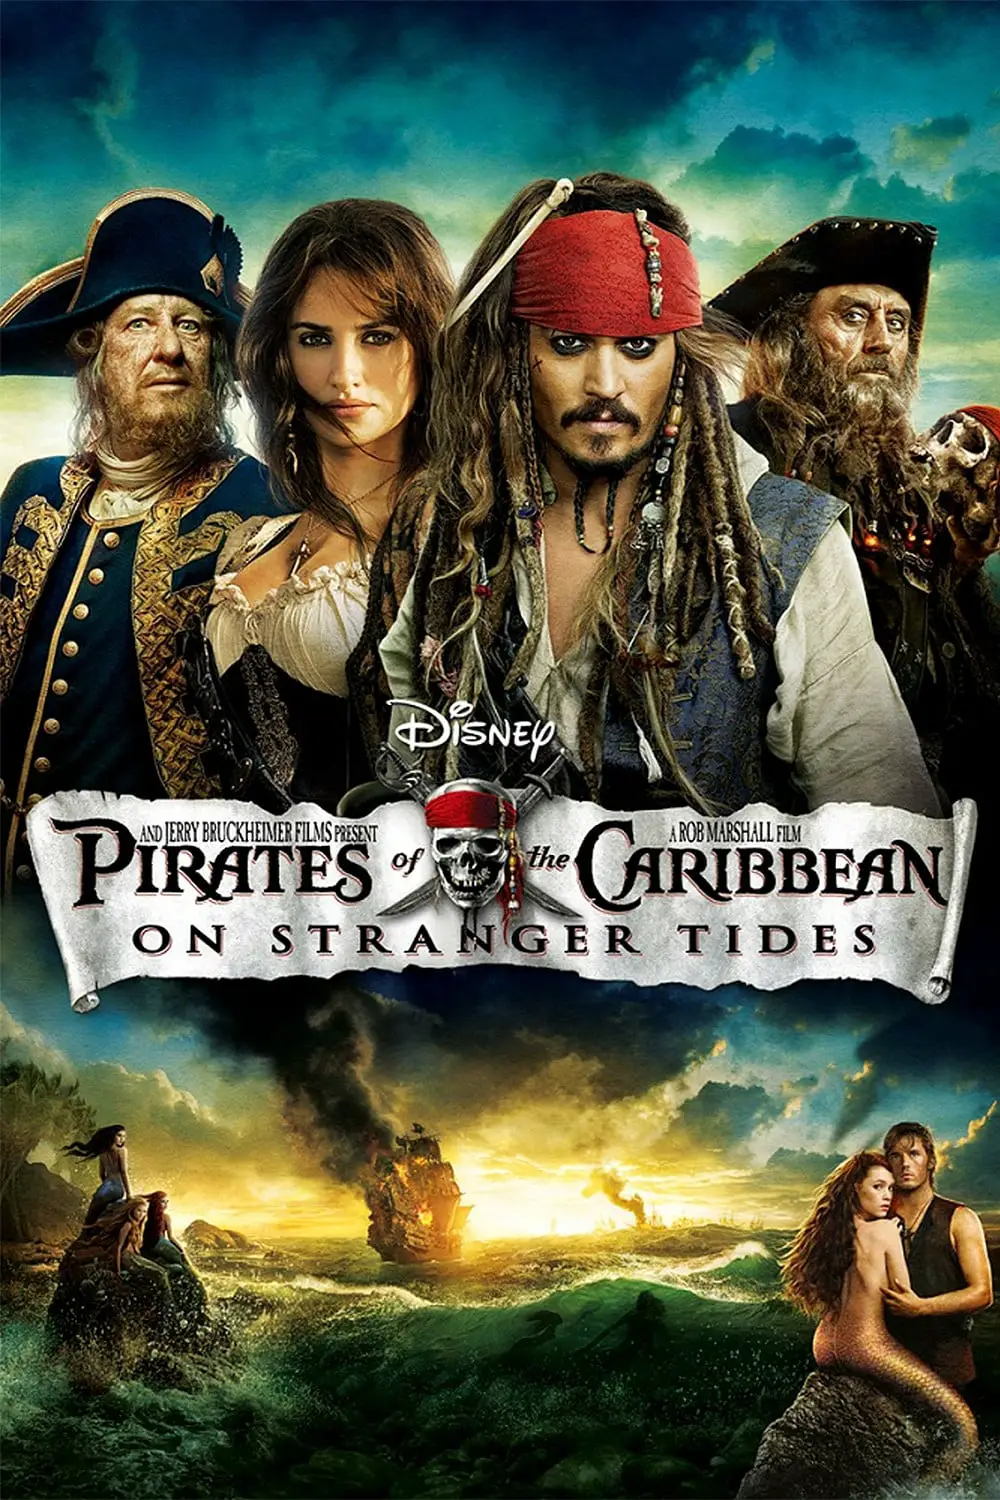 You are currently viewing Pirates of the Caribbean: On Stranger Tides